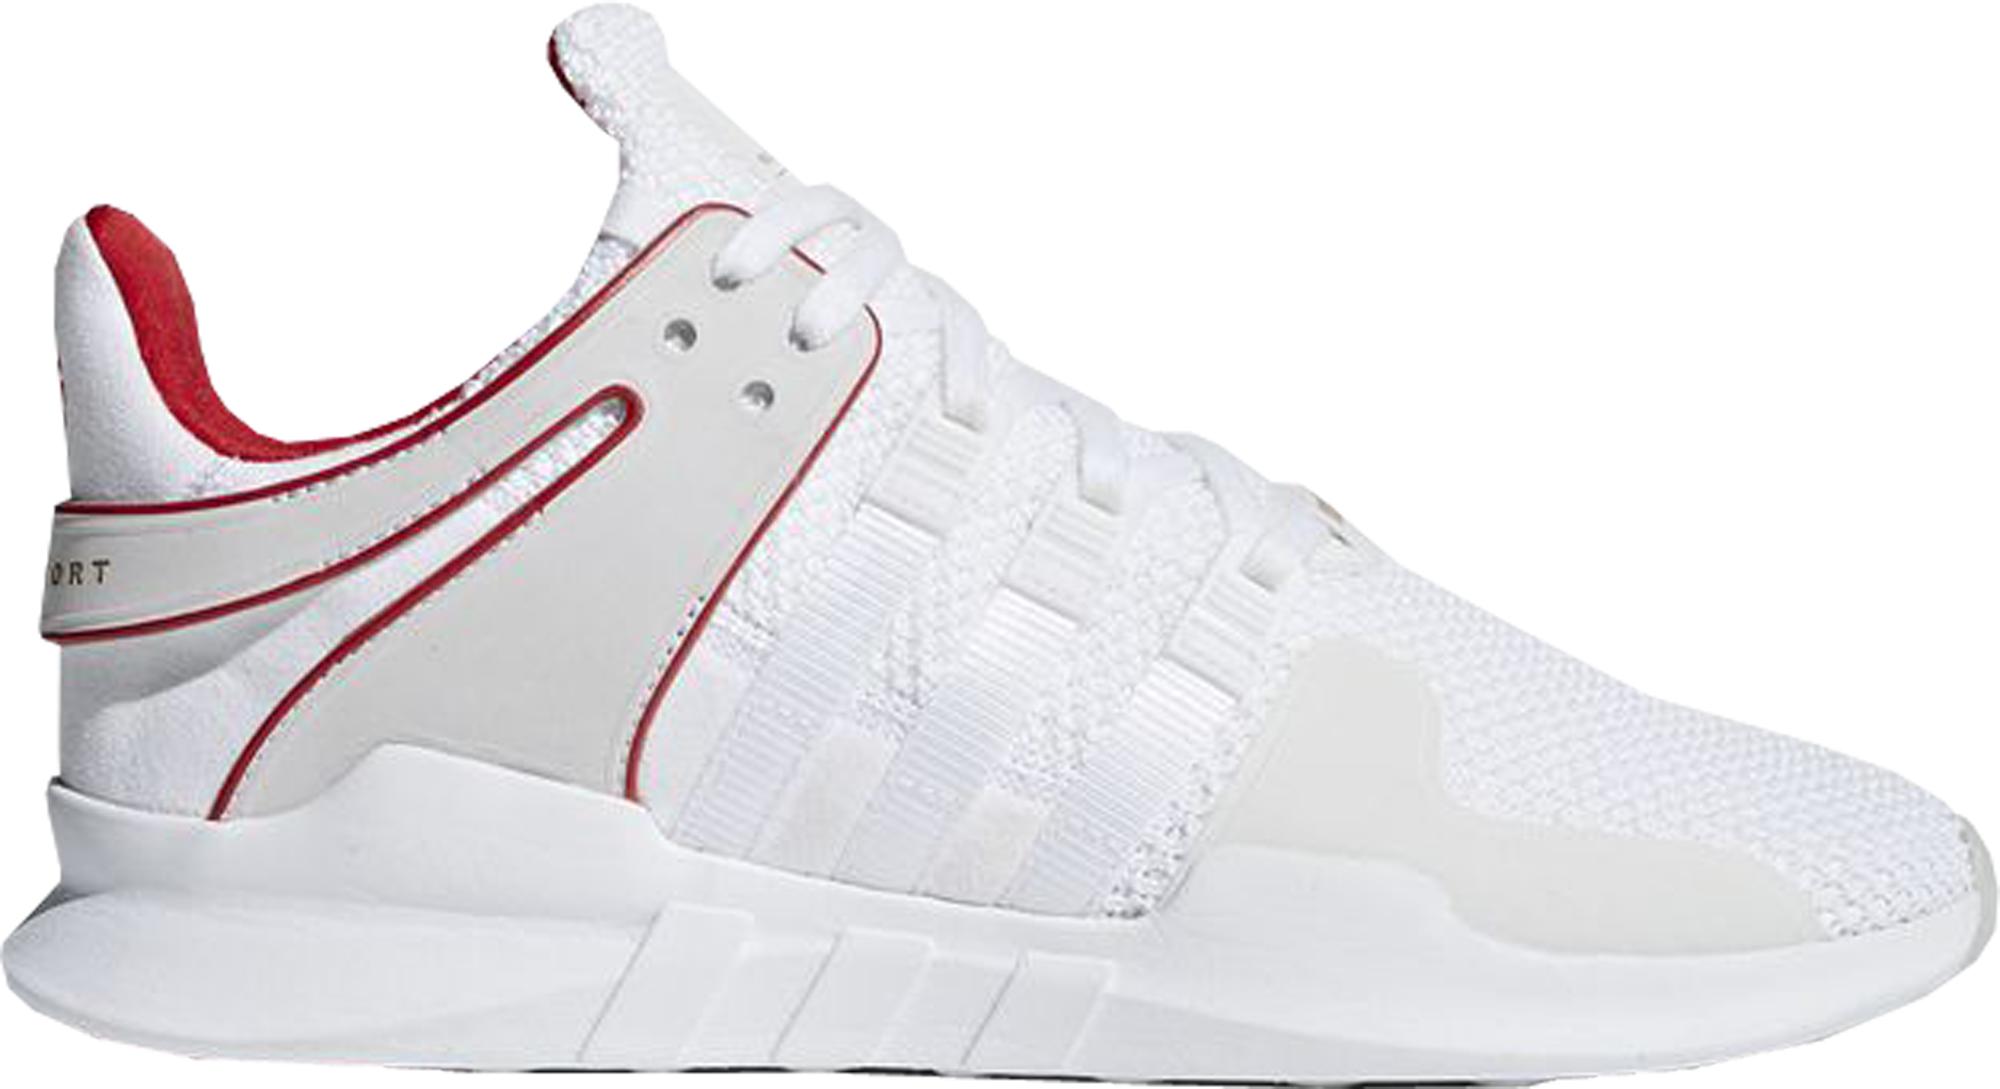 adidas EQT Support Adv Chinese New Year 2018